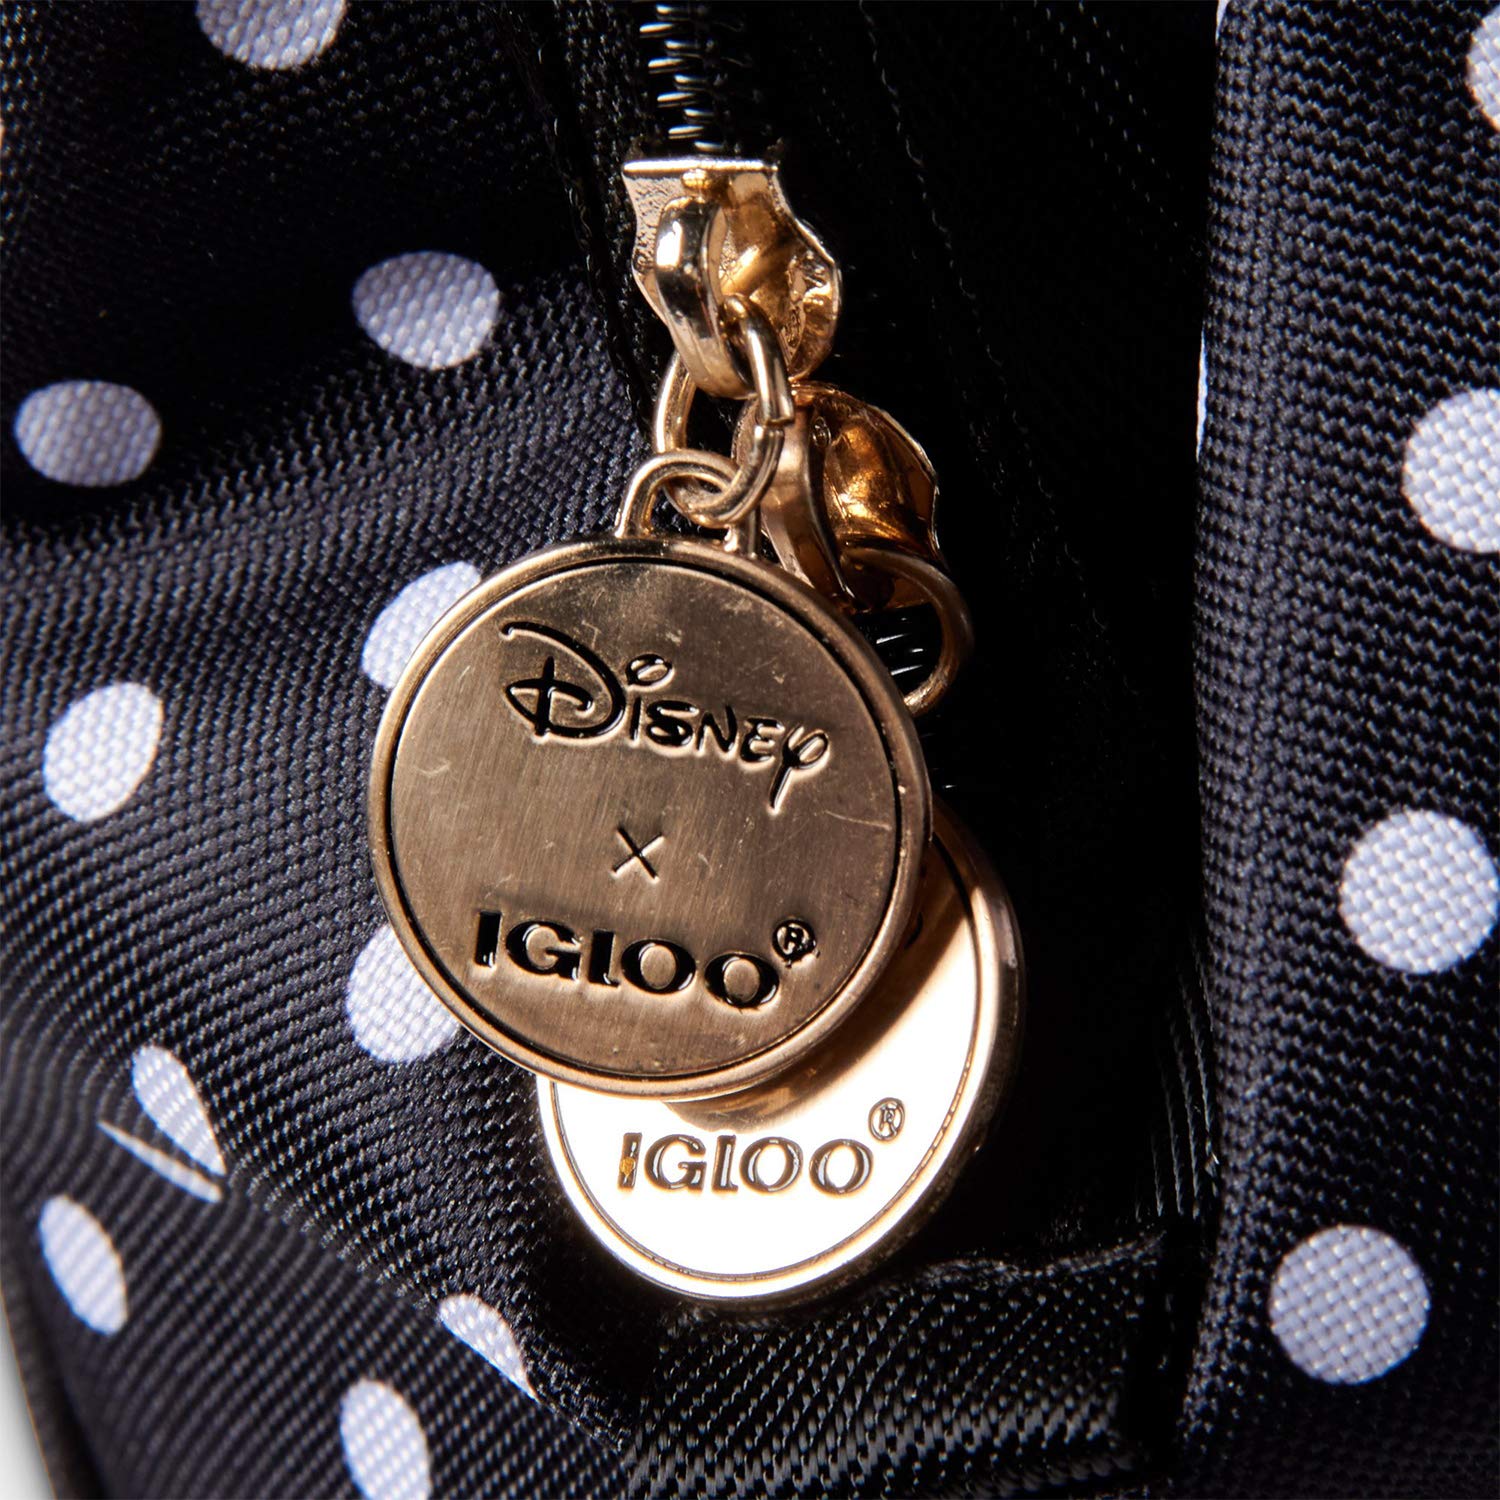 Igloo 20-can Limited Edition Disney Soft Sided Tote Bag